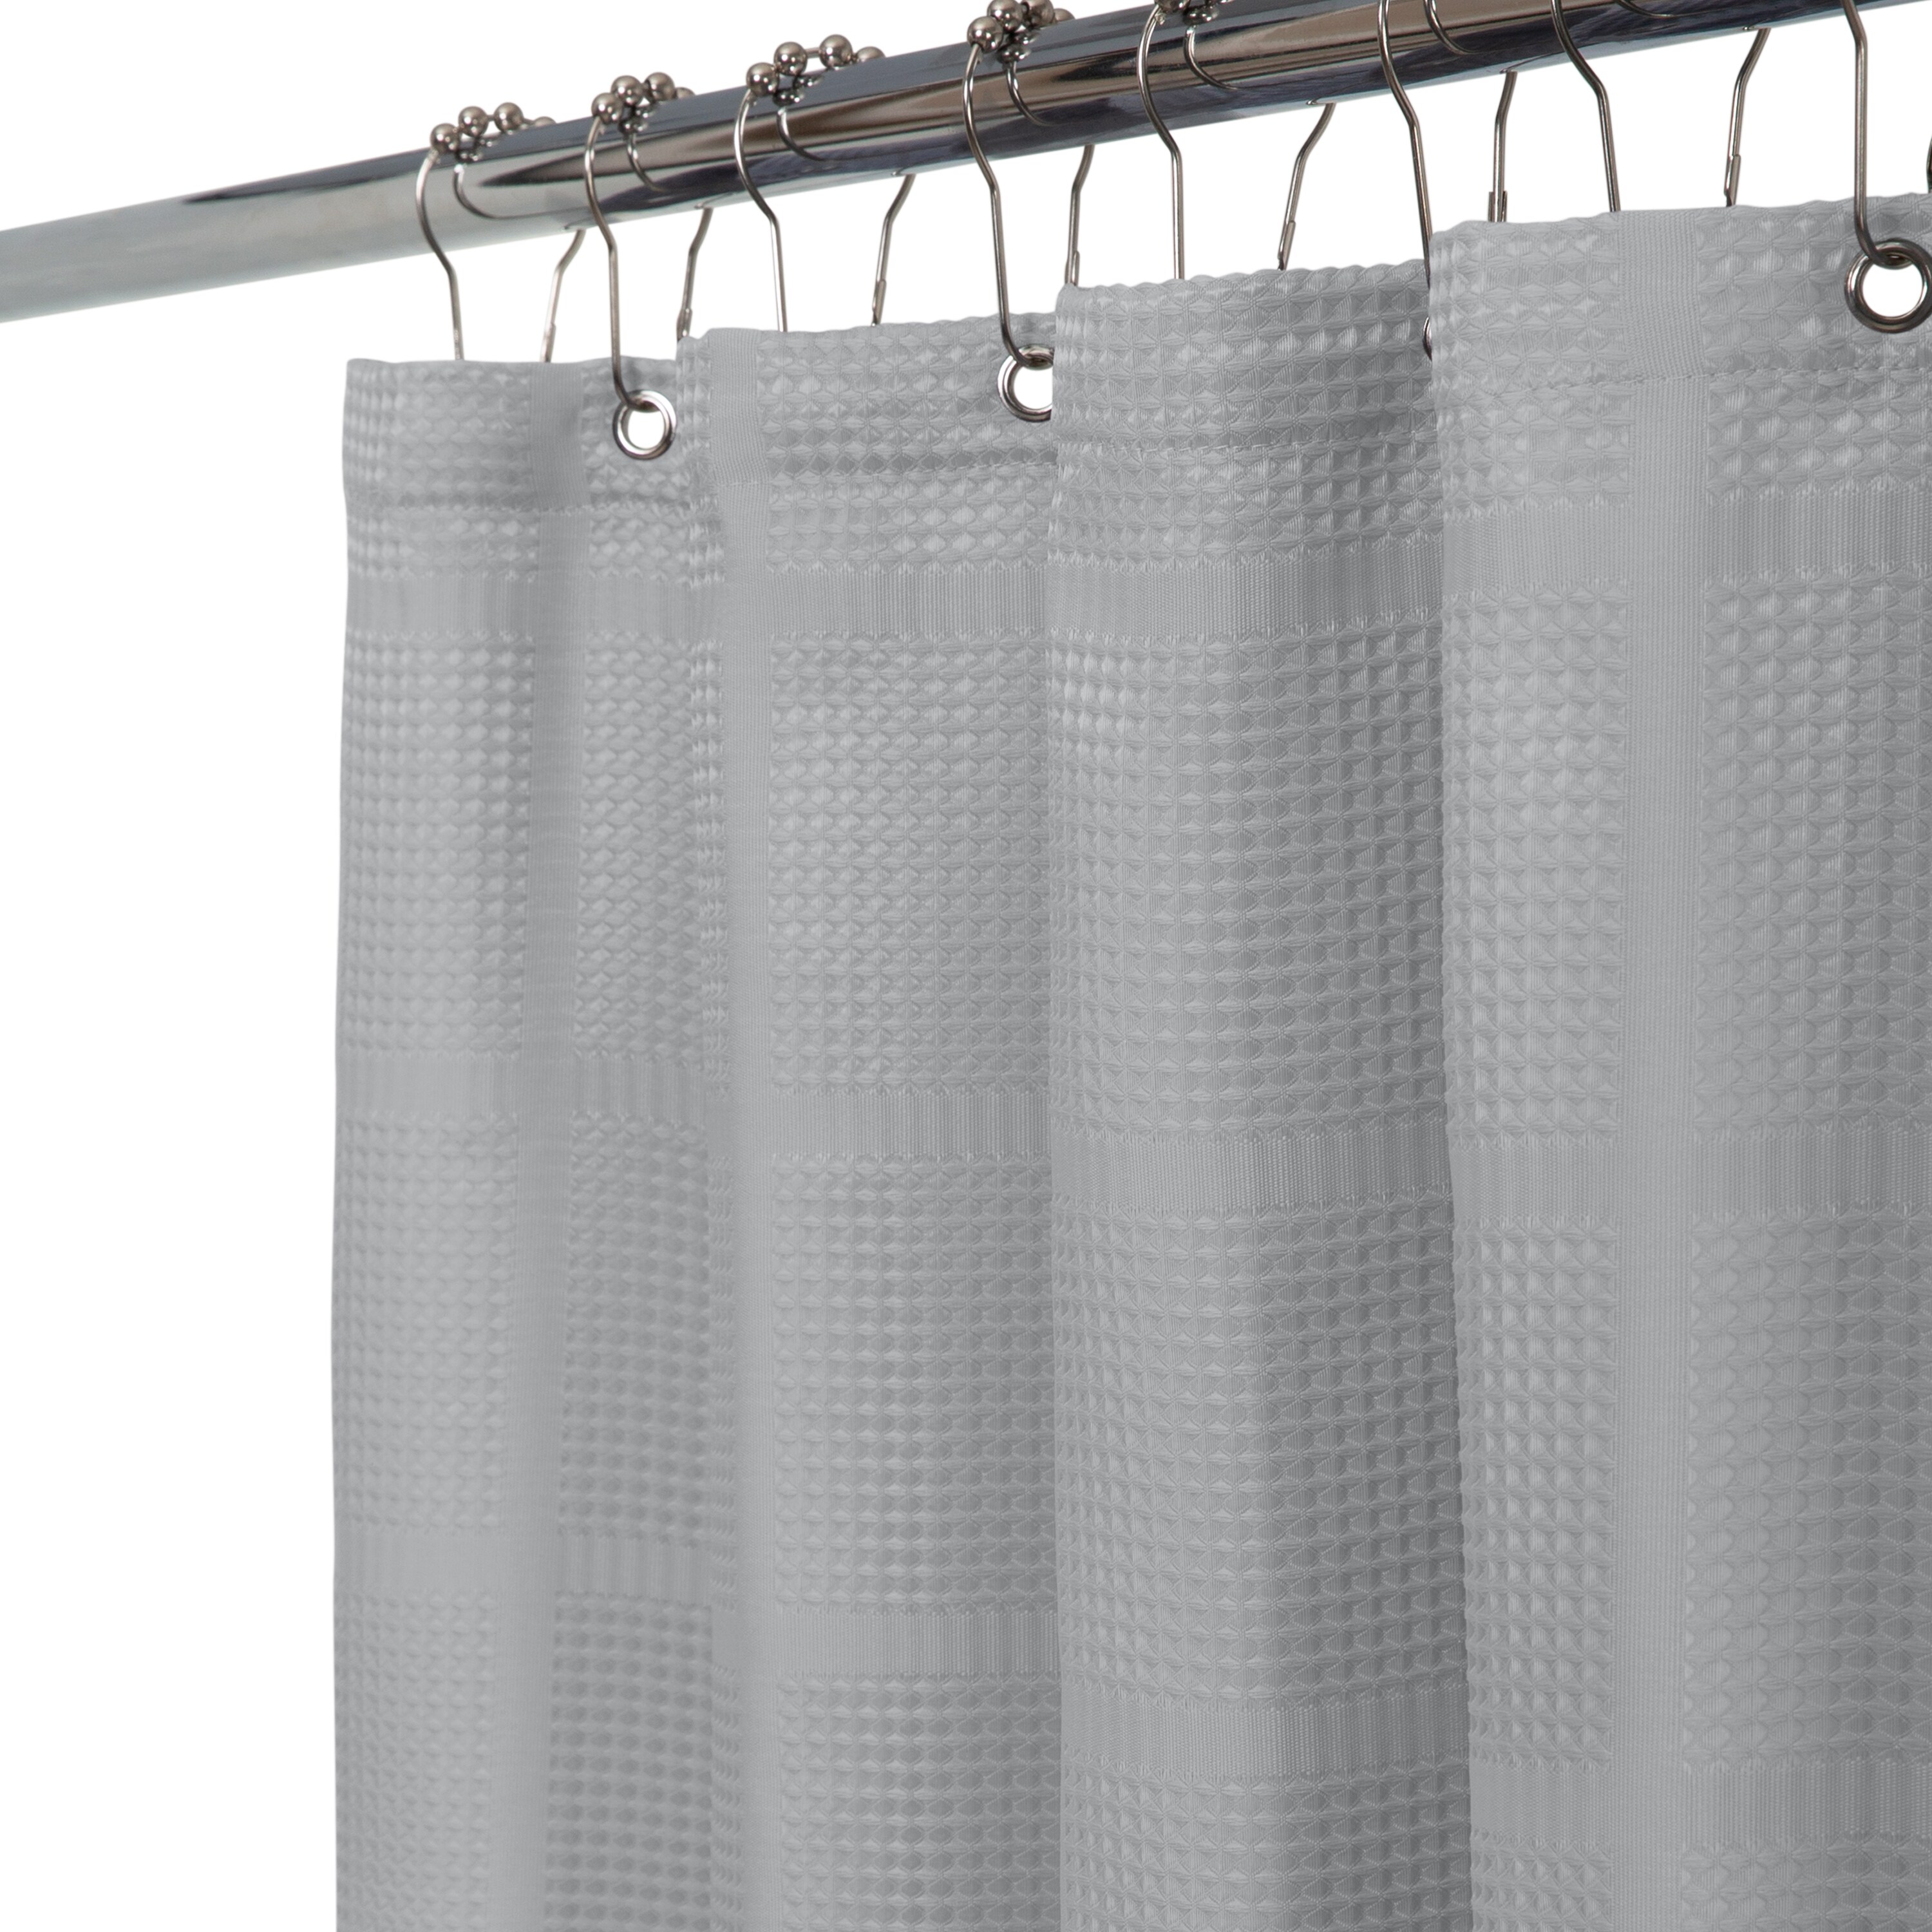 Polyester Grey Patterned Shower Curtain, 72 X 70 Shower Curtain